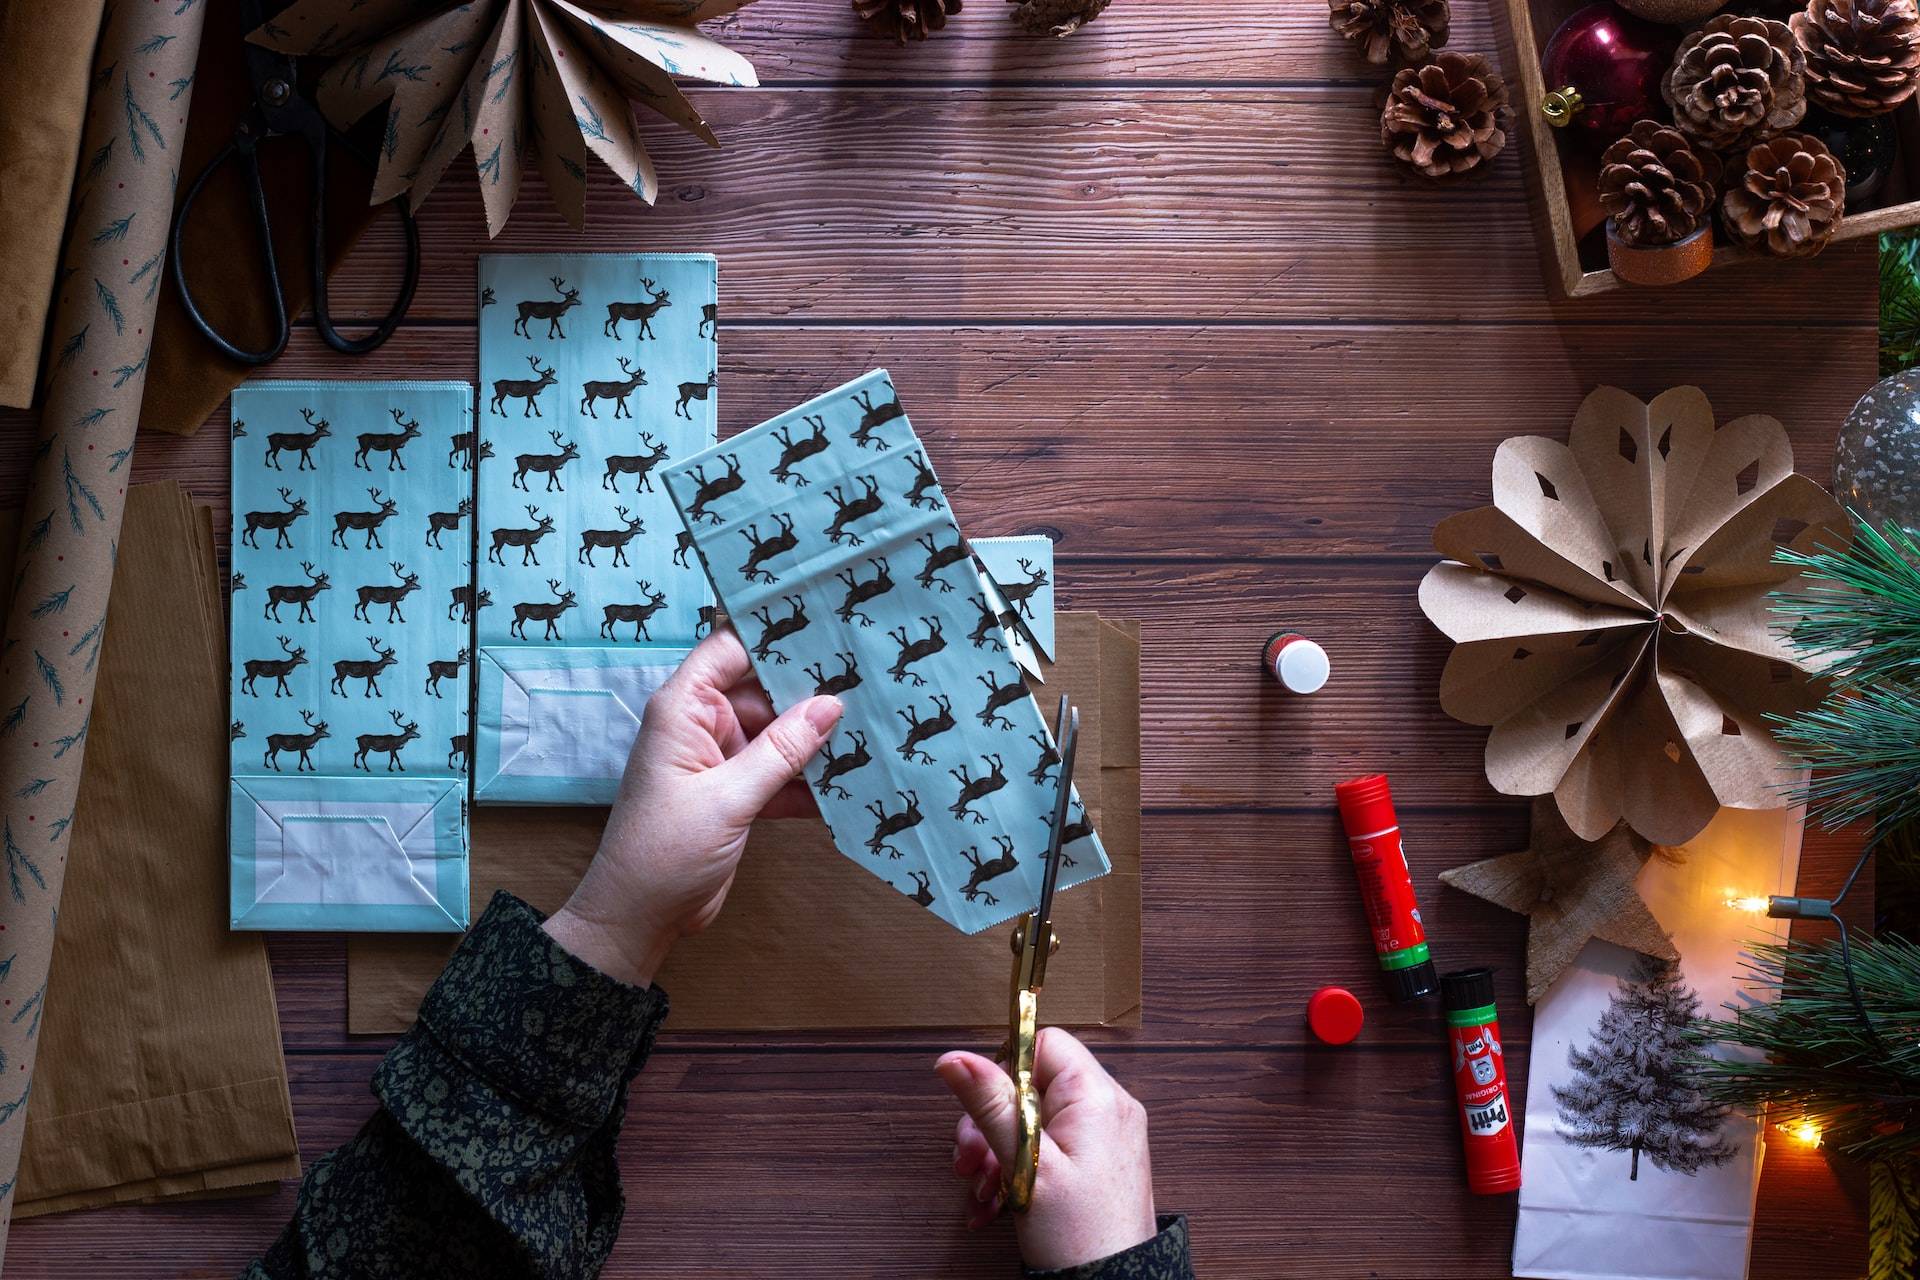 Easy Christmas crafting ideas for kids